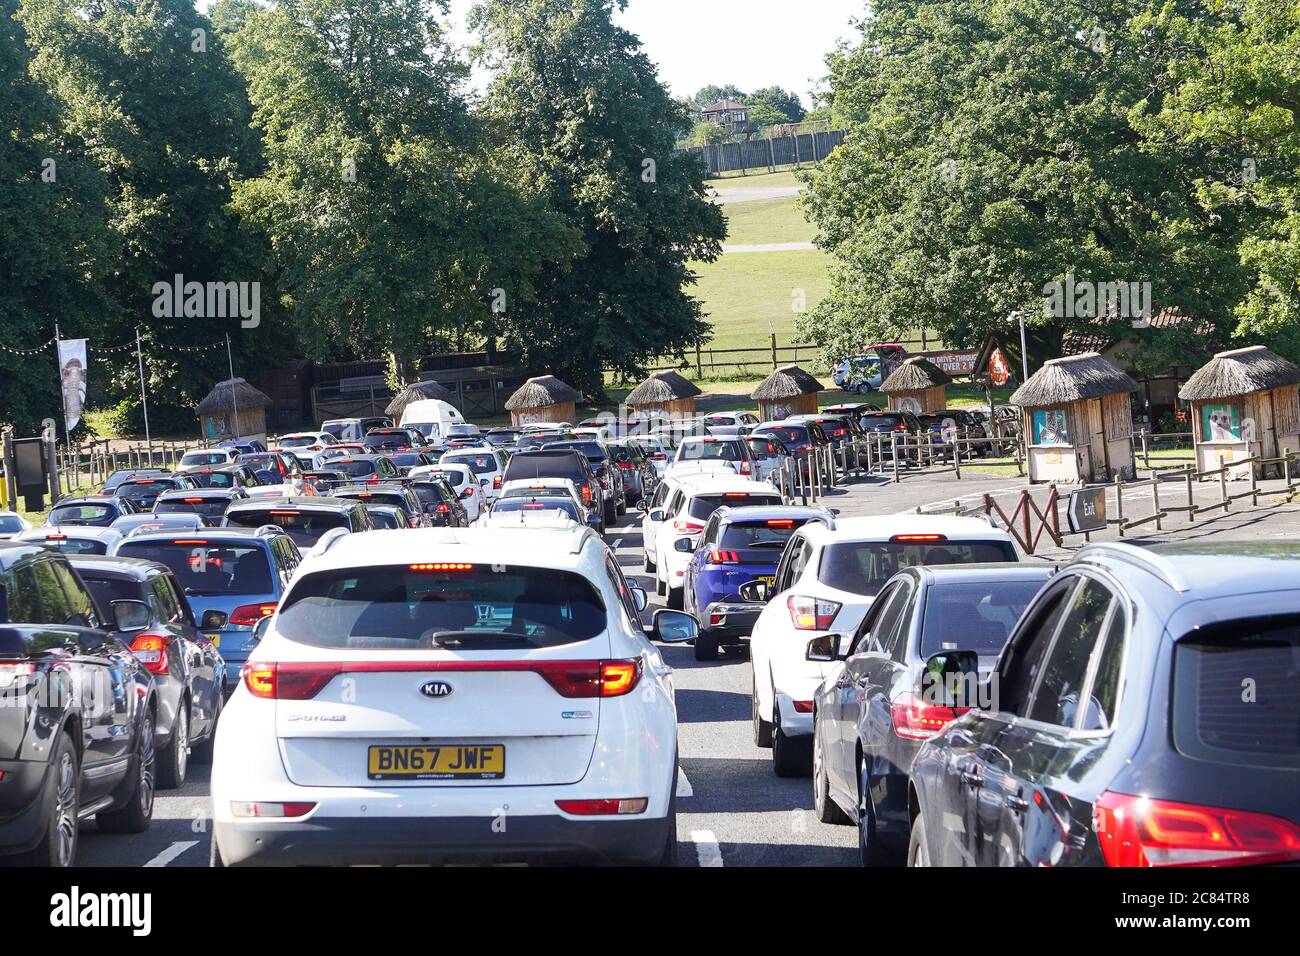 Bewdley, UK. 21st July, 2020. At the start of the official school holidays, the UK shows massive support for a visitor attraction hard-hit during the coronavirus lockdown. Visitors now flock in their droves to the West Midland Safari Park. Queues may be long, but Brits are used to queuing and nothing will stop them from showing their support for all things wild and from enjoying their UK staycation activities. Credit: Lee Hudson/Alamy Live News Stock Photo